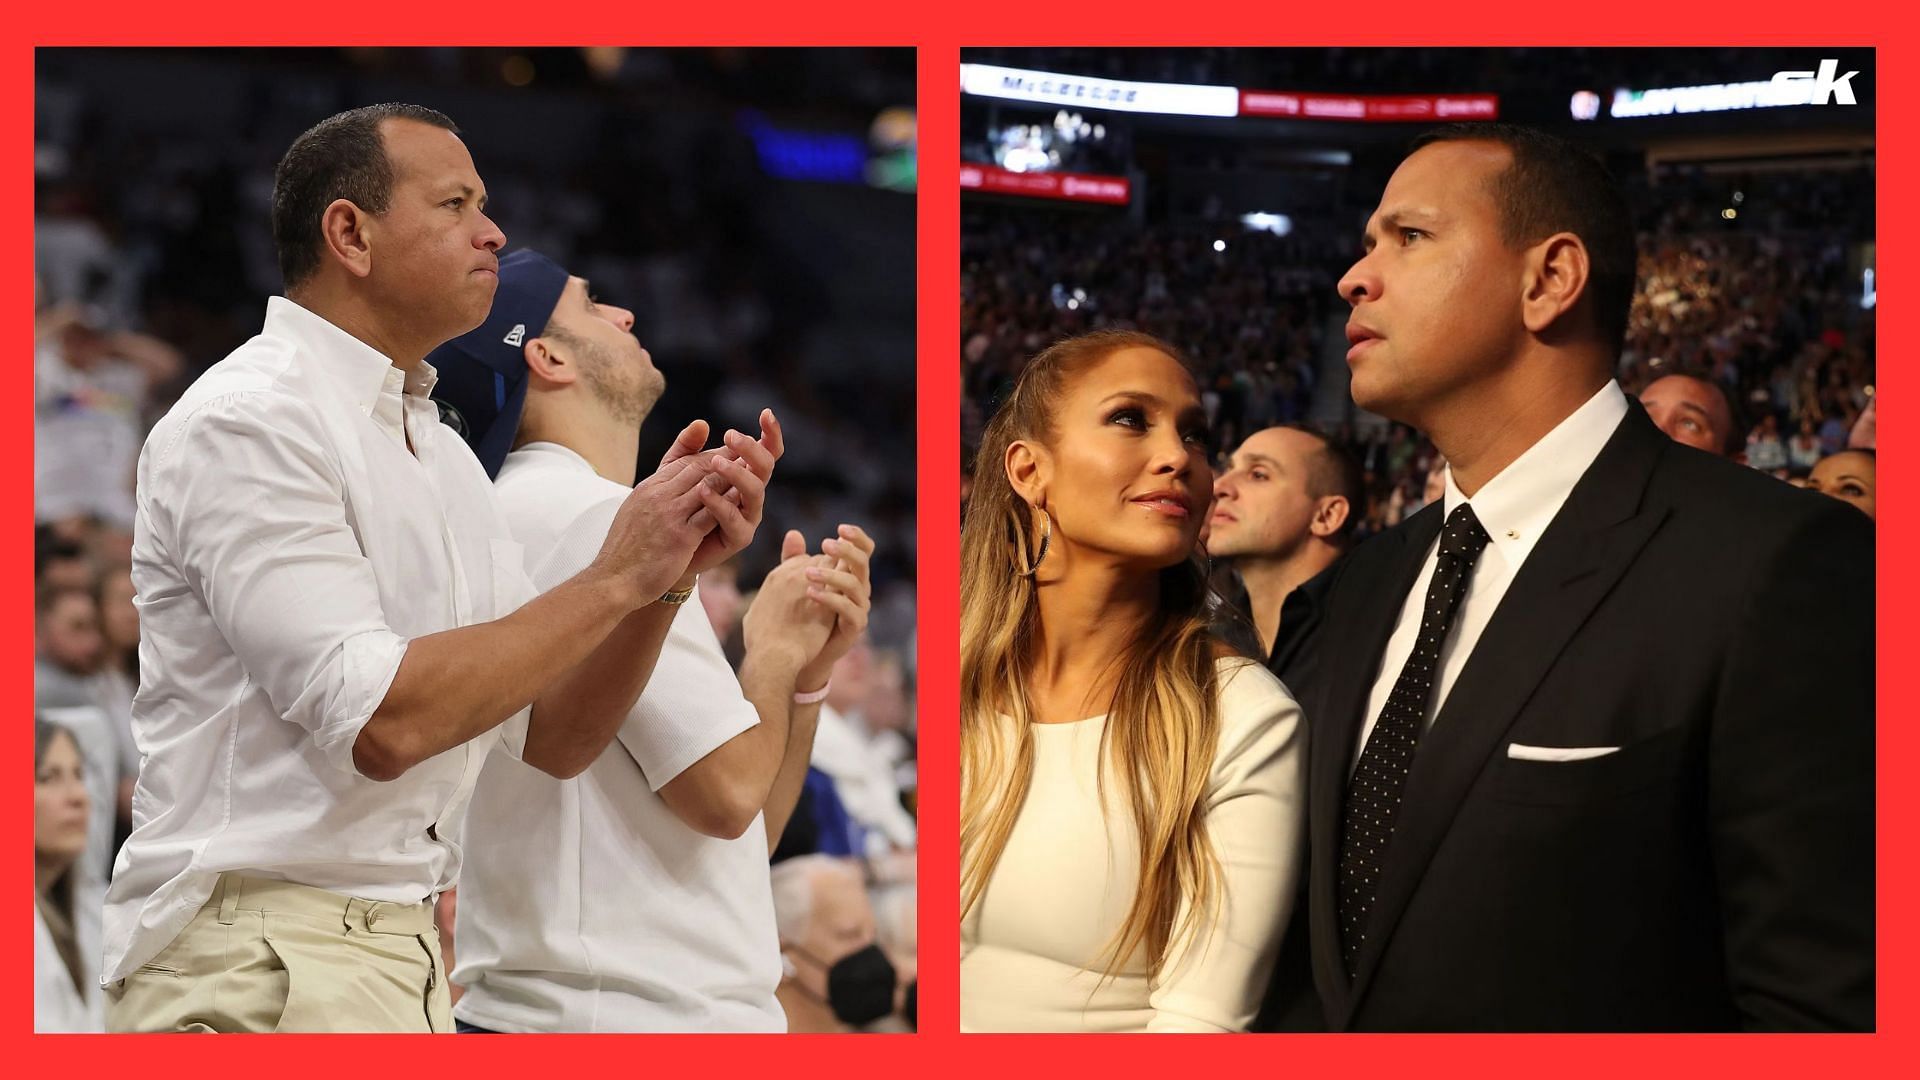 Jennifer Lopez received insightful marriage advice from a law expert while she was engaged to Yankees icon Alex Rodriguez